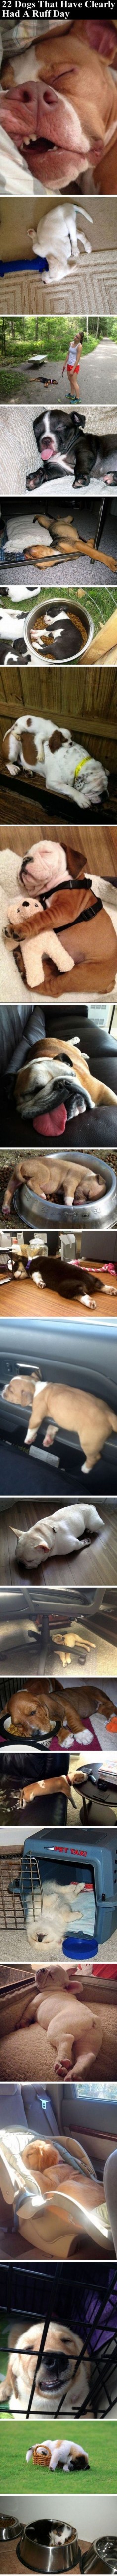 22 Dogs That Have Clearly Had A Ruff Day cute animals dogs adorable dog puppy animal pets funny animals funny pets funny dogs